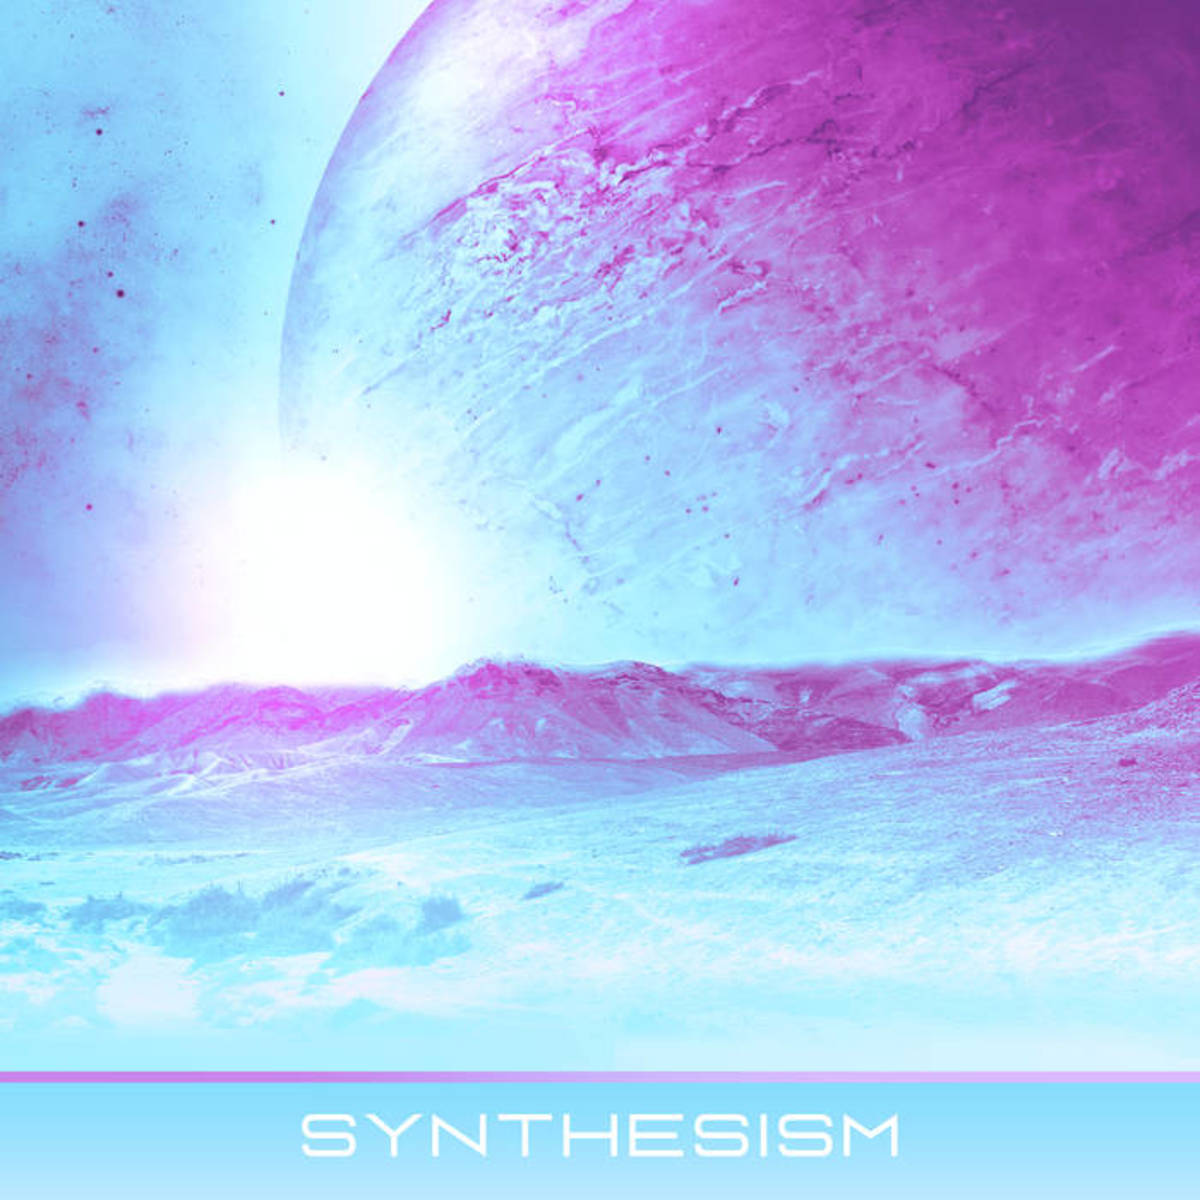 Synthesism